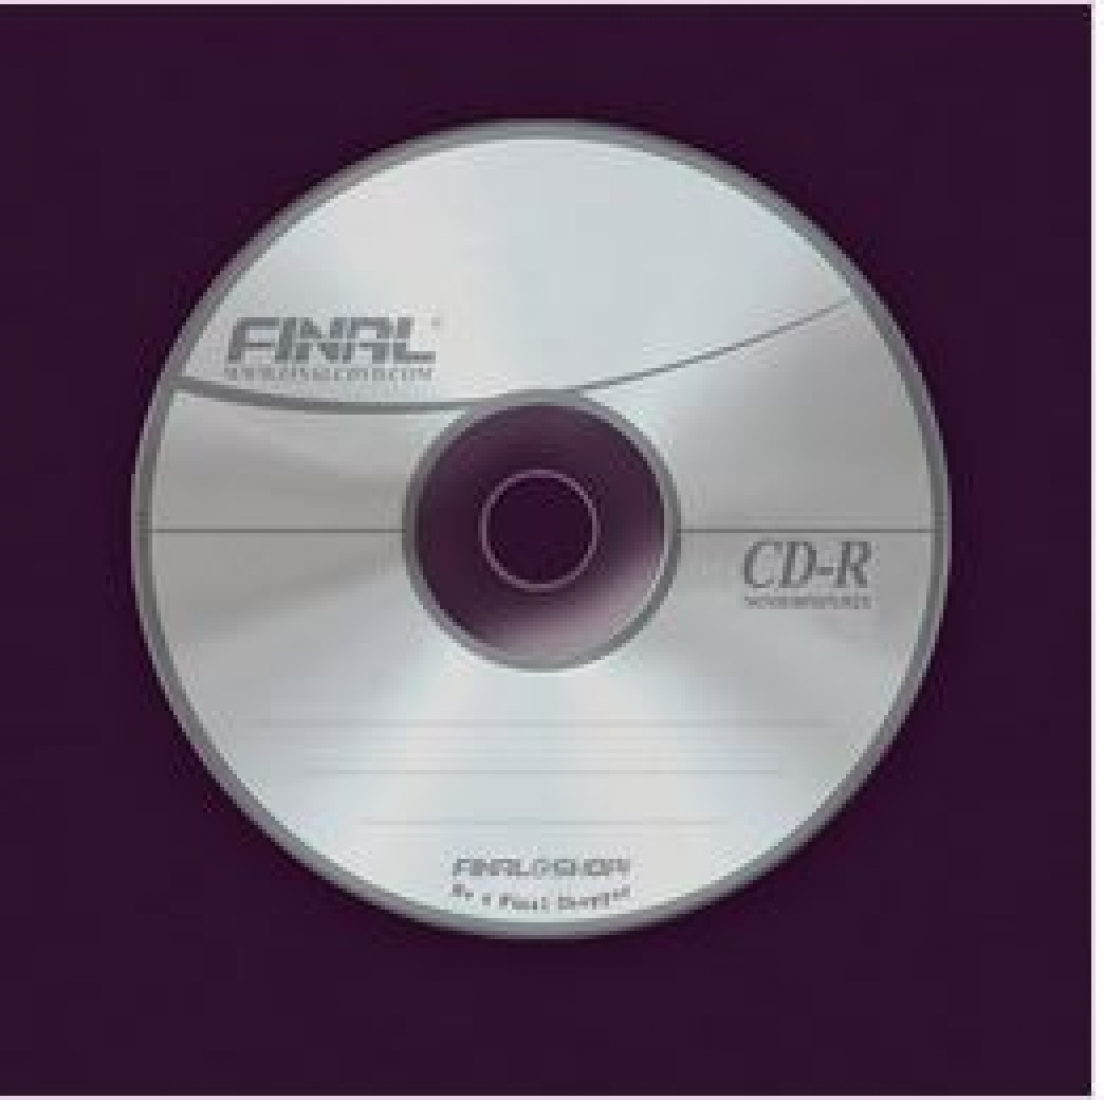 120 mm Recordable Compact Disc (CD-R)